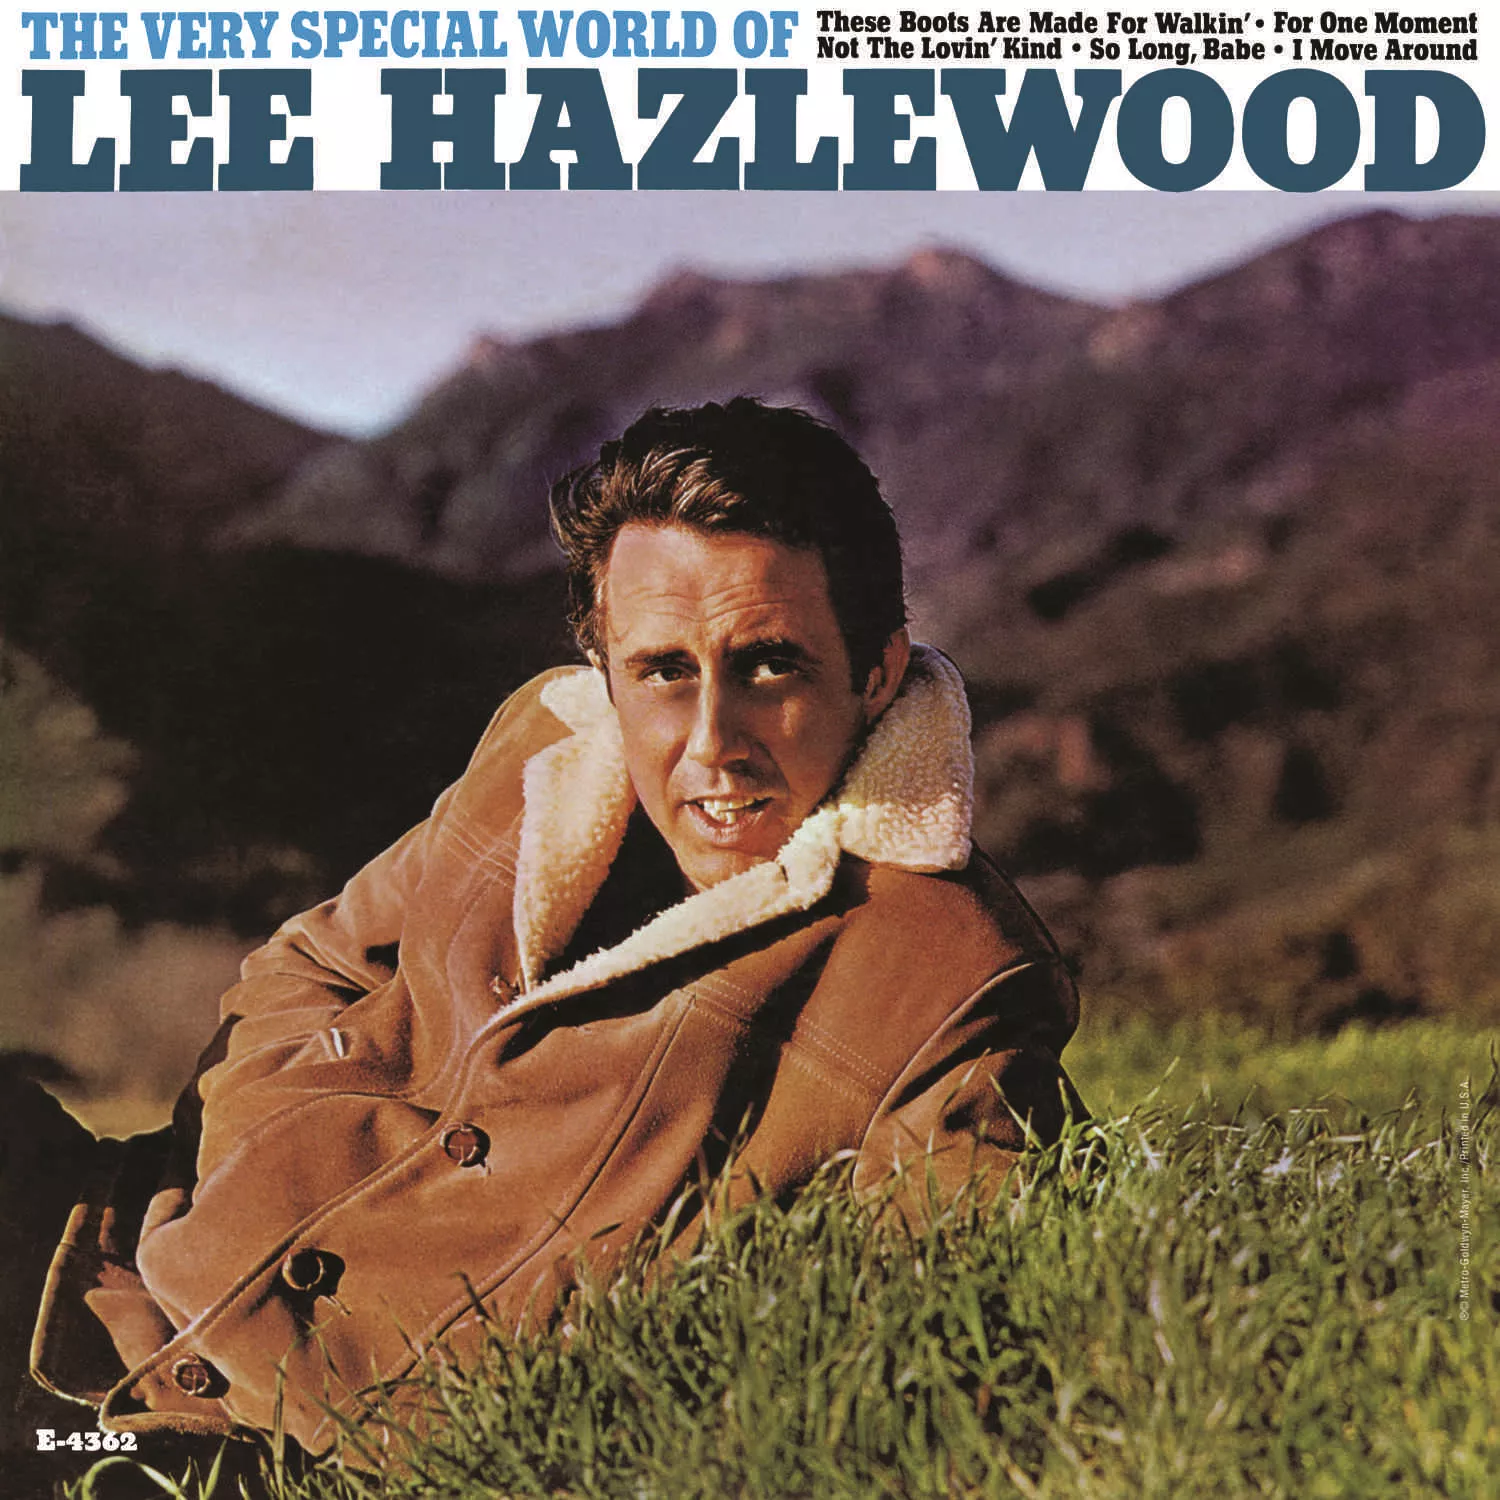 The Very Special World Of Lee Hazlewood, Lee Hazlewoodism: Its Cause And Cure, Something Special - Lee Hazlewood